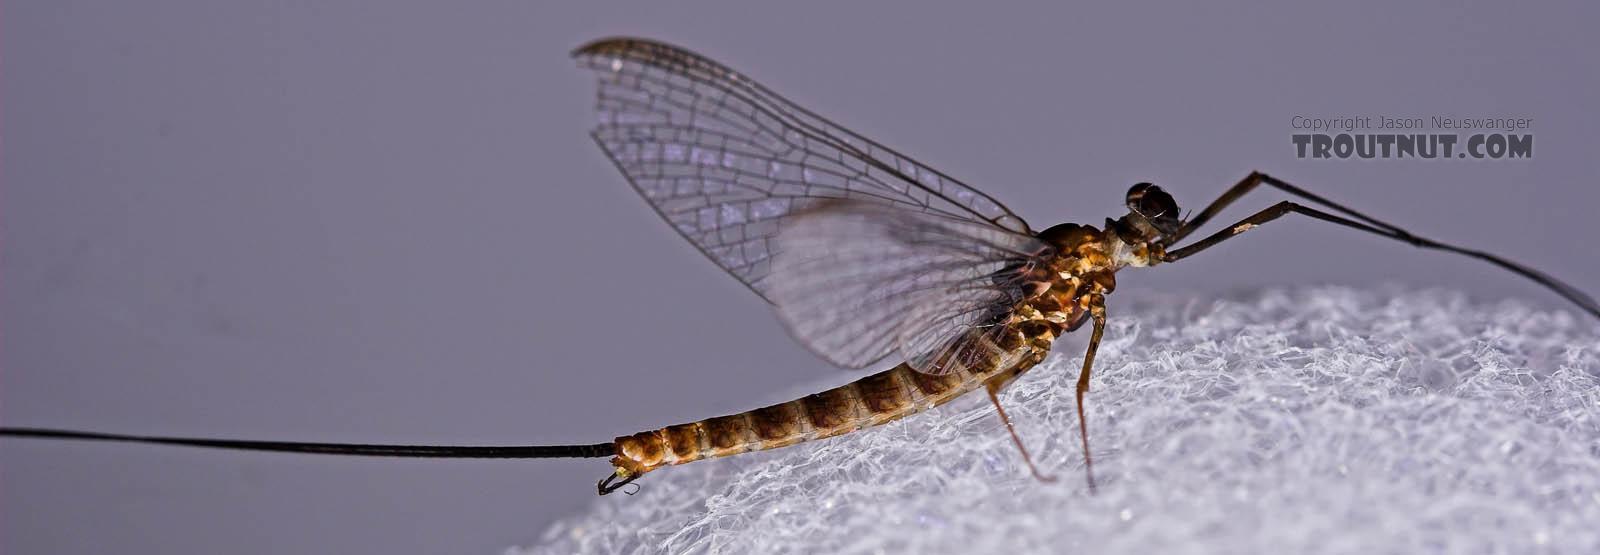 Male Epeorus pleuralis (Quill Gordon) Mayfly Spinner from Mongaup Creek in New York